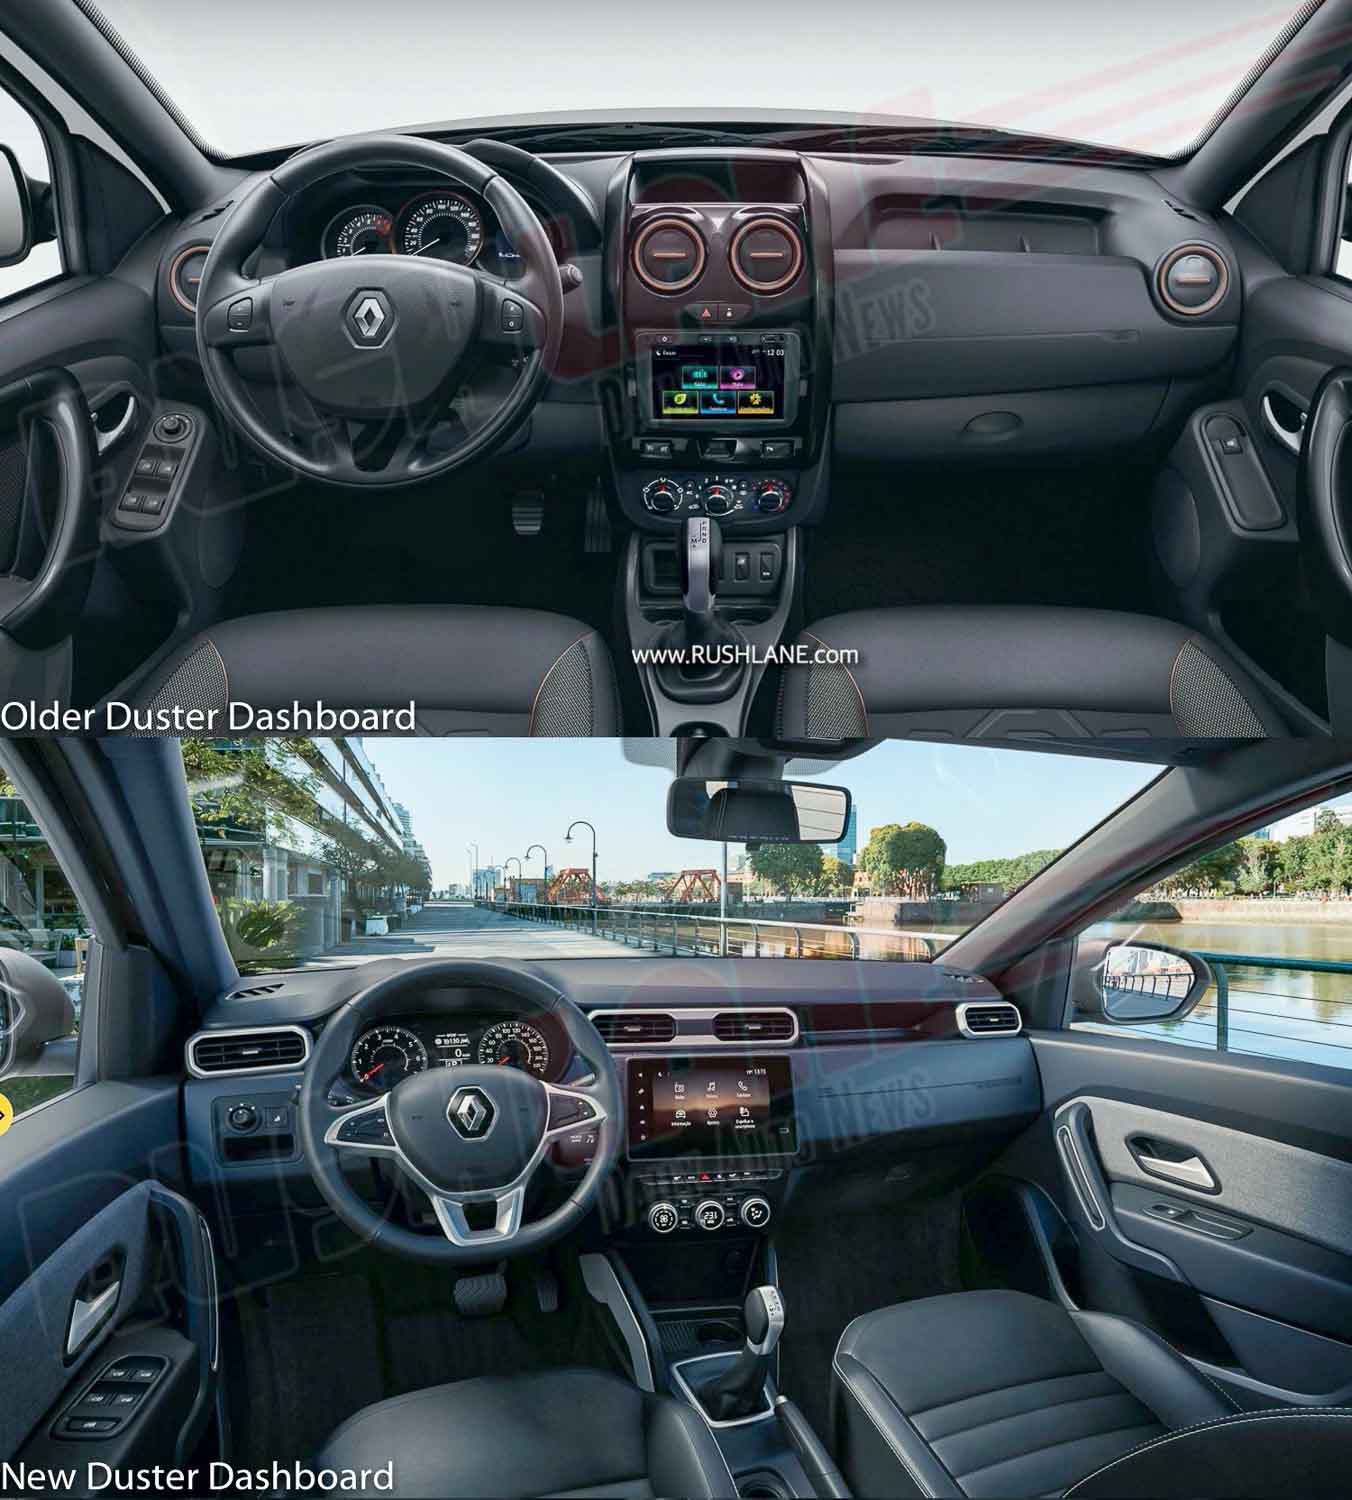 Renault Duster Interiors Old vs New